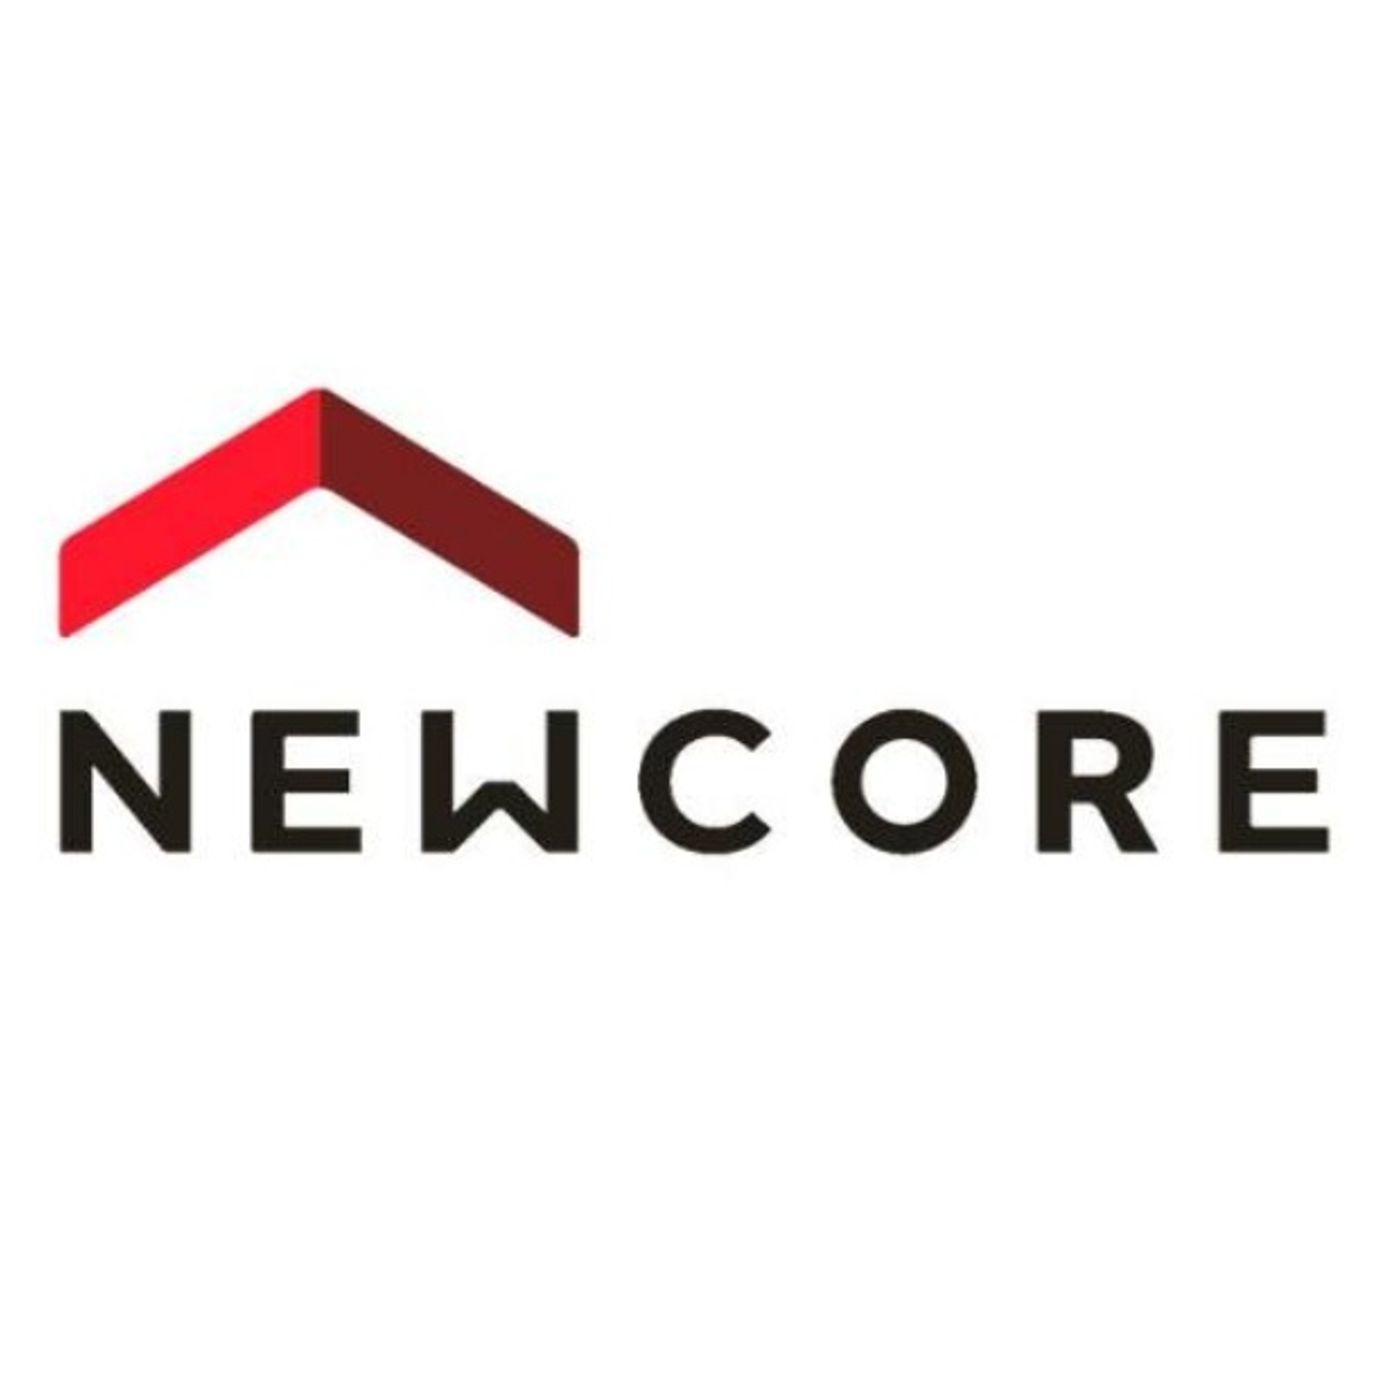 NCN NEWCORE News #6